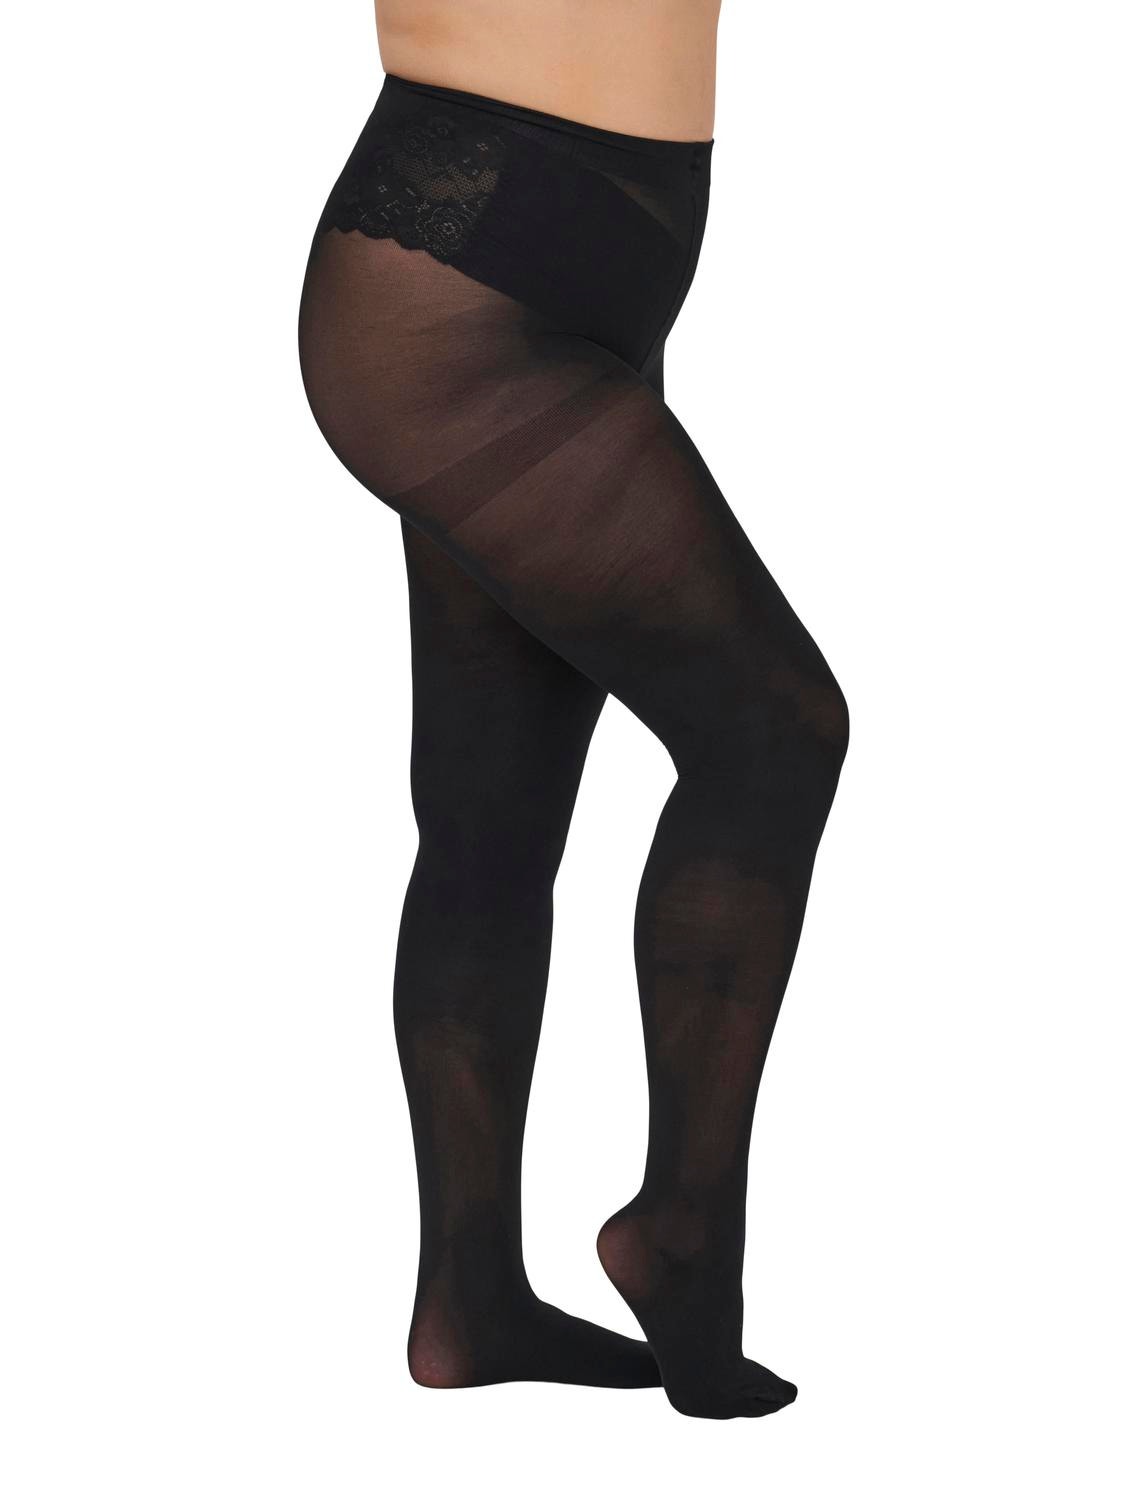 https://images.only.com/15219823/3514359/008/only-curvybasicpantyhose-black.jpg?v=9d32cad8cc2d8c05fc600e2e9a7cbc5d&format=webp&width=1280&quality=90&key=25-0-3